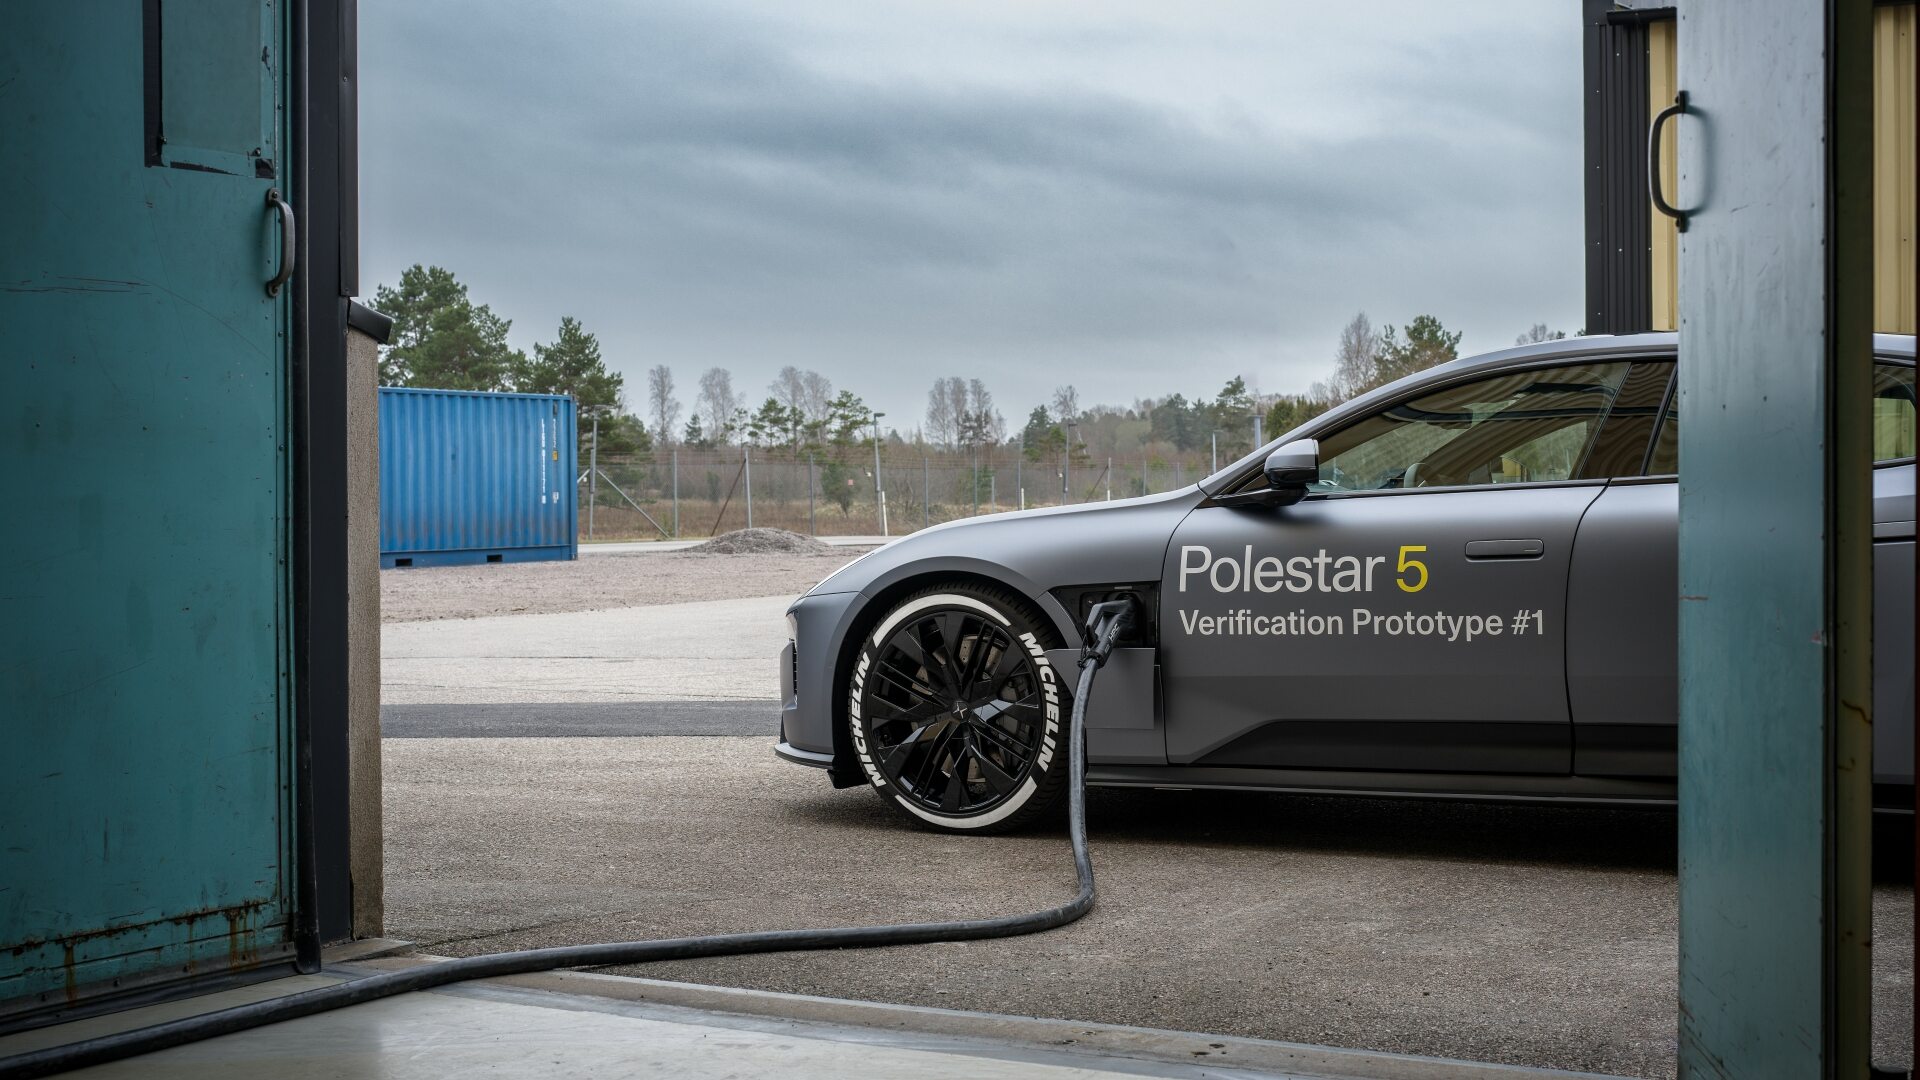 The Polestar 5 Verification Prototype #1 Connected To A Charging Cable (Credits Polestar Global Media Newsroom)